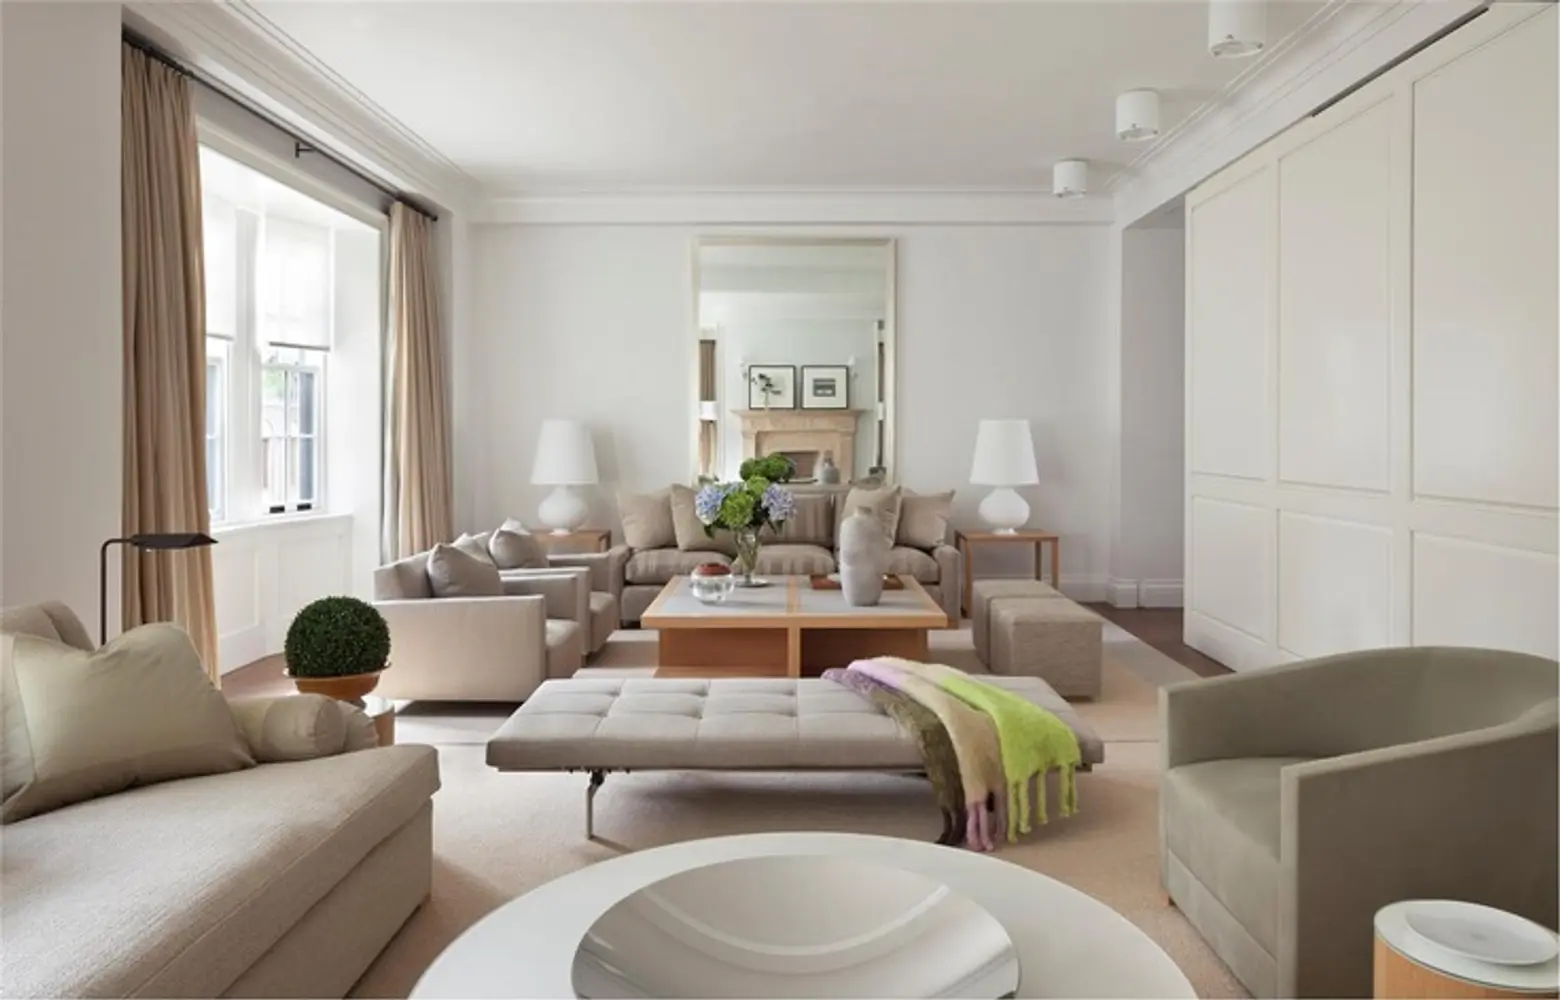 11 East 68th St, The Marquand, Kimora Lee Simmons apartment interior, Tim Leissner